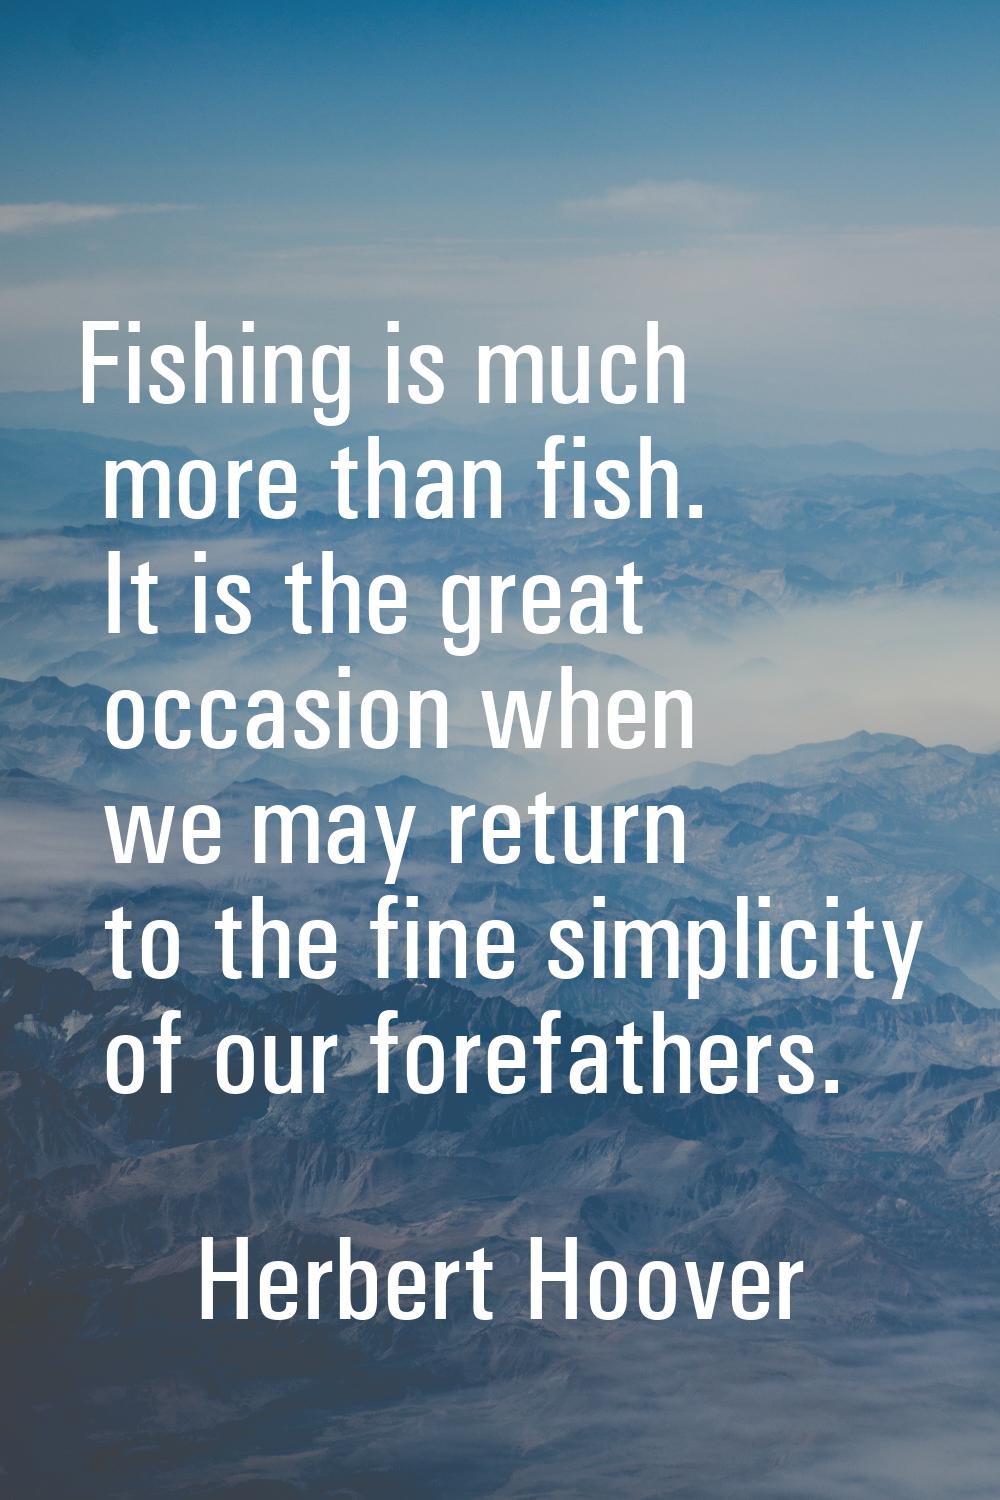 Fishing is much more than fish. It is the great occasion when we may return to the fine simplicity 